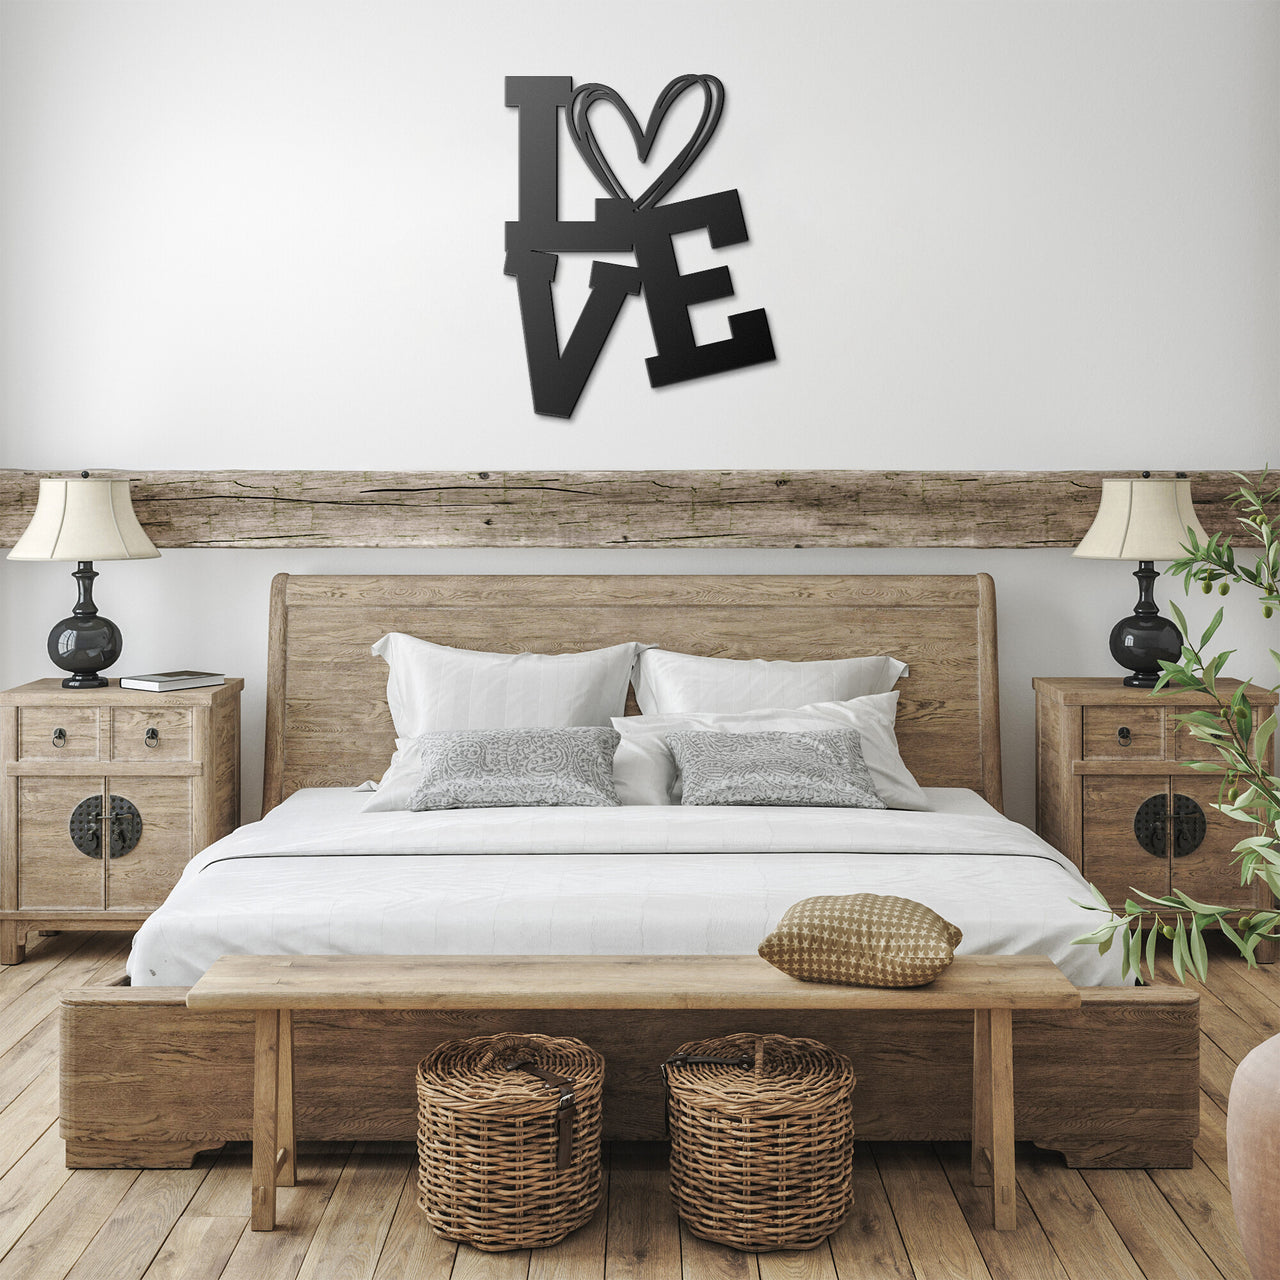 About Love Graphic-1_Steel Wall Art